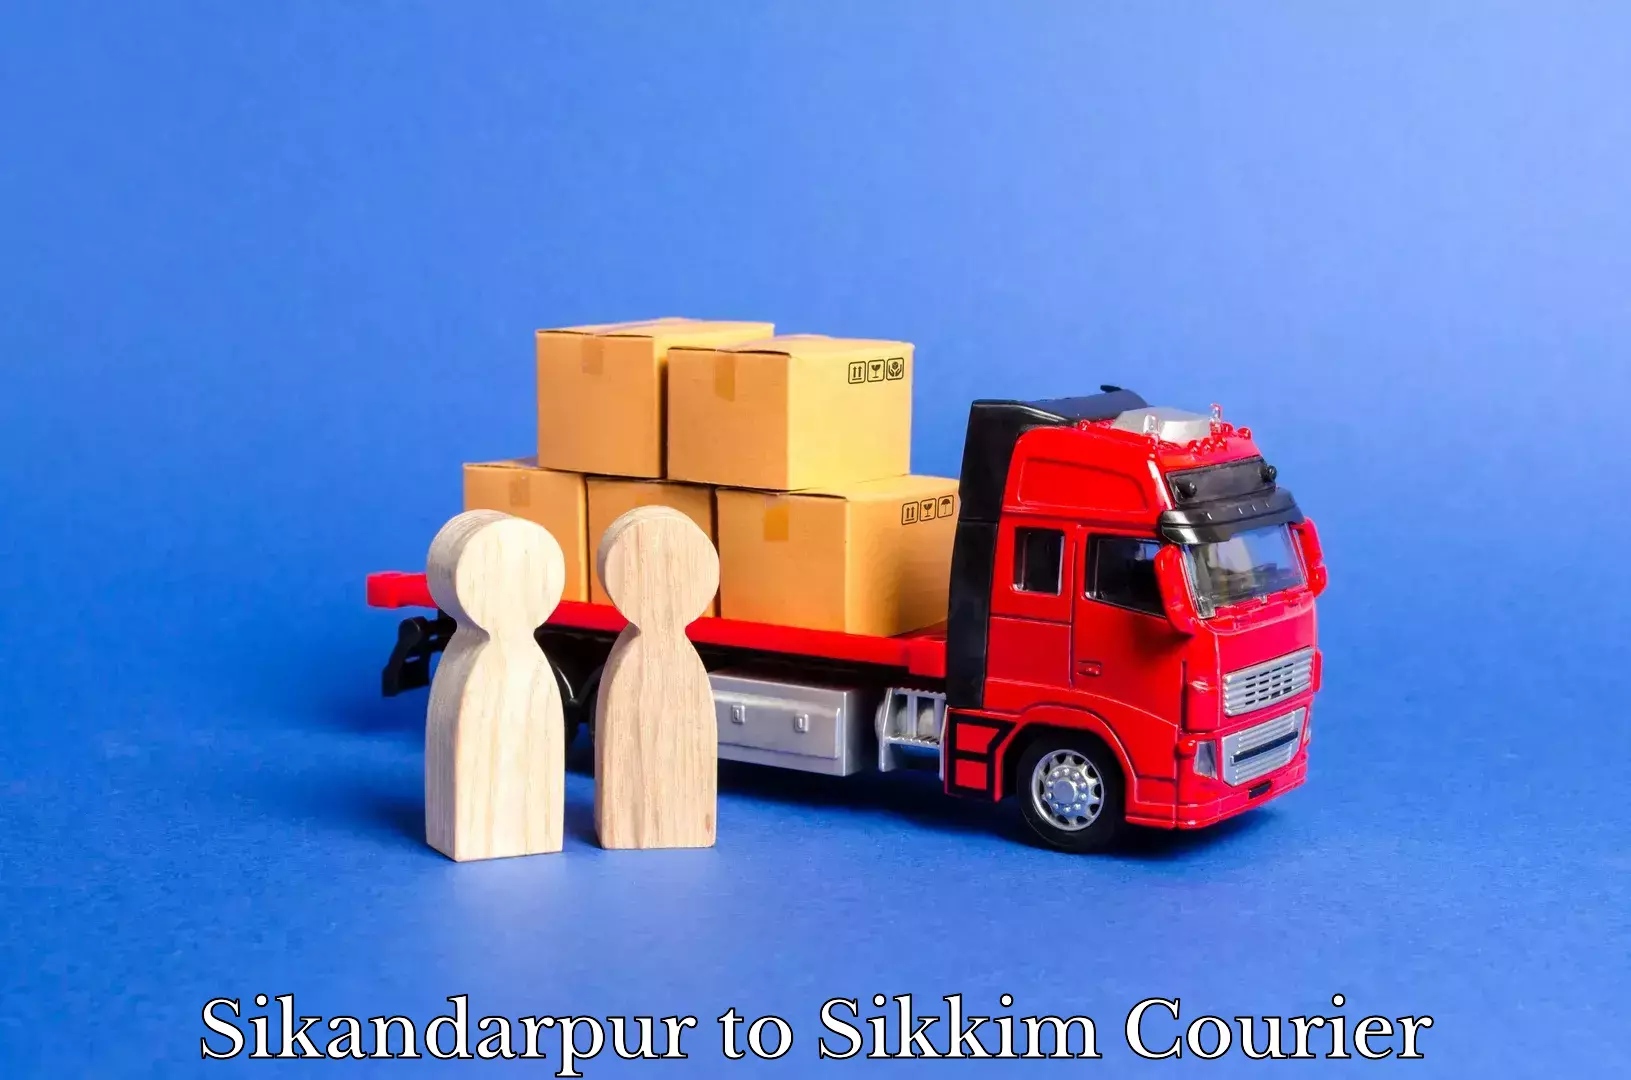 Smart shipping technology in Sikandarpur to Sikkim